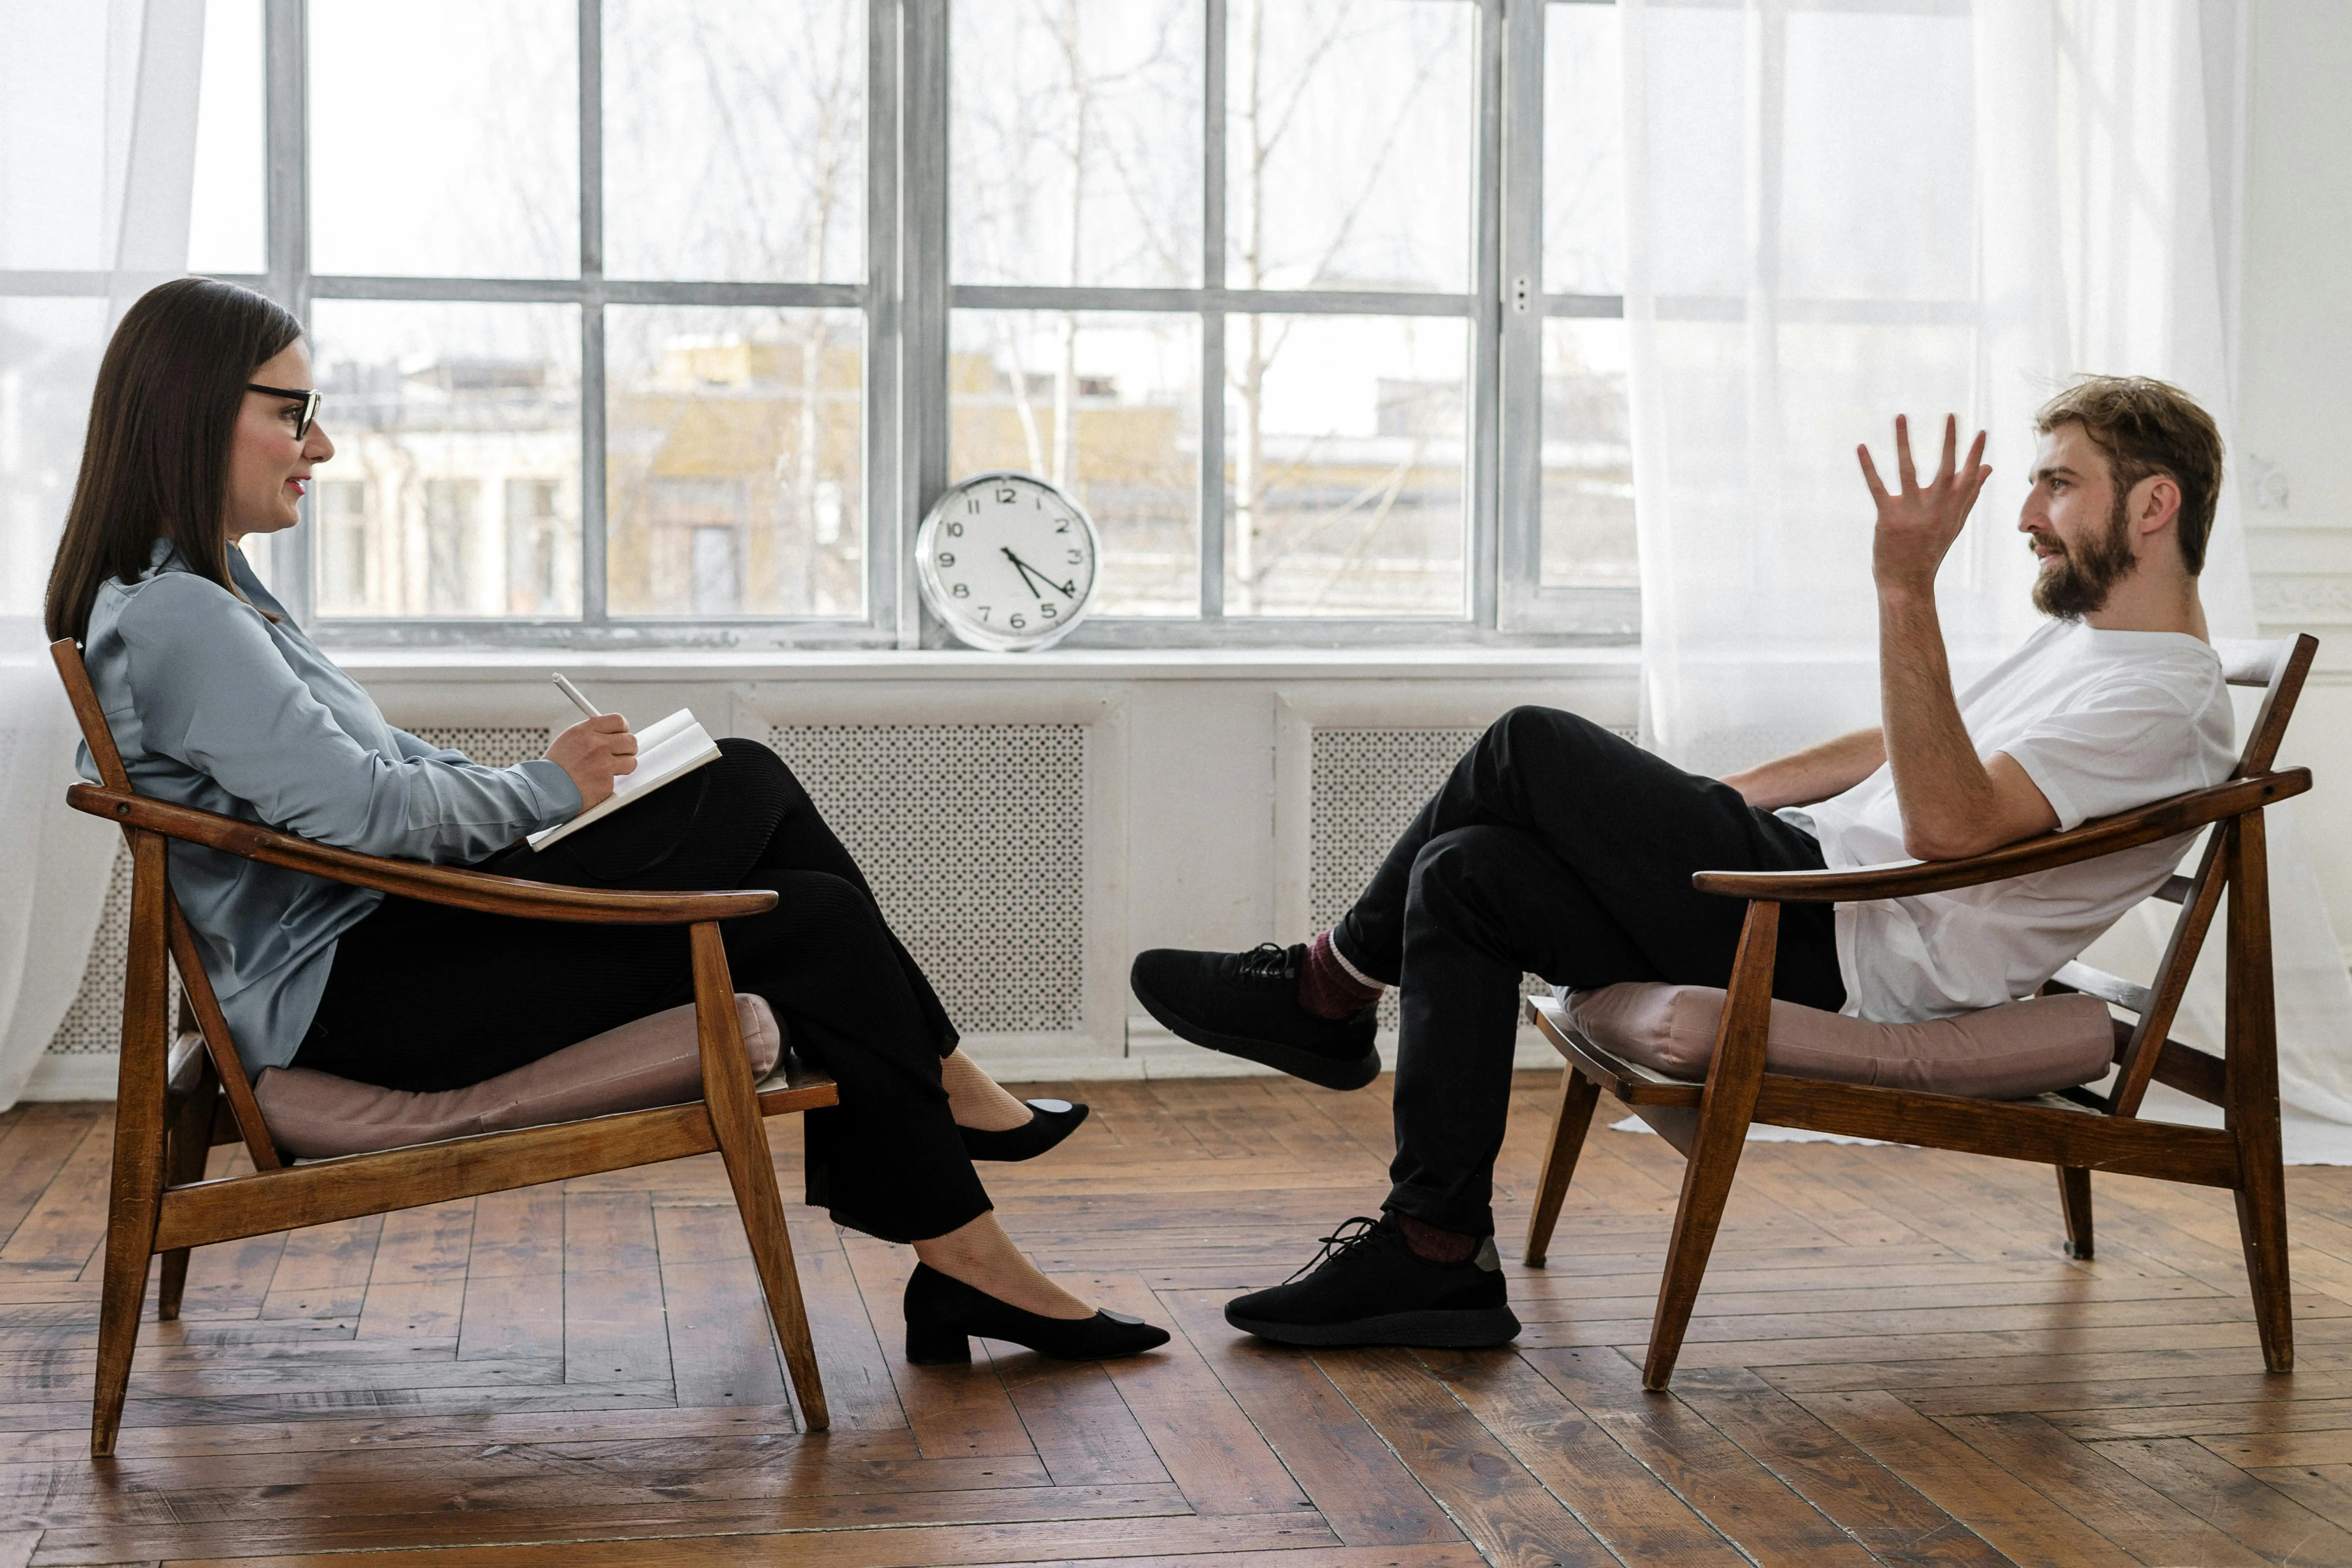 a man and woman sitting in chairs having a discussion regarding treatment programs